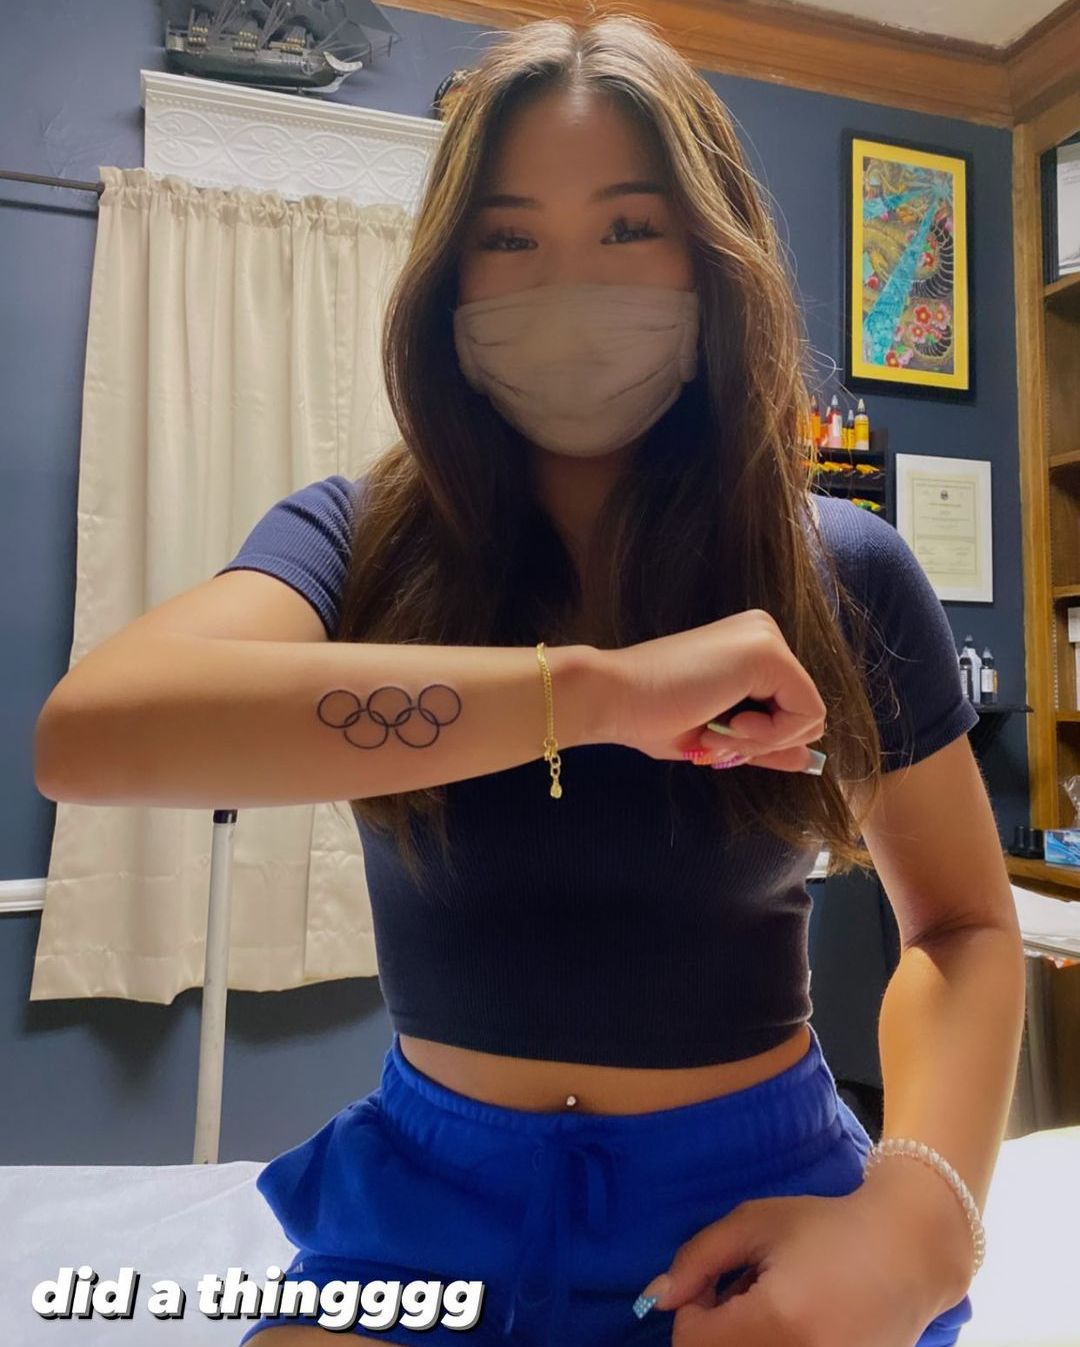 Tokyo Olympics: 10 athletes who have rings tattoo, including Hong Kong's  own Siobhan Haughey and Stephanie Au | South China Morning Post